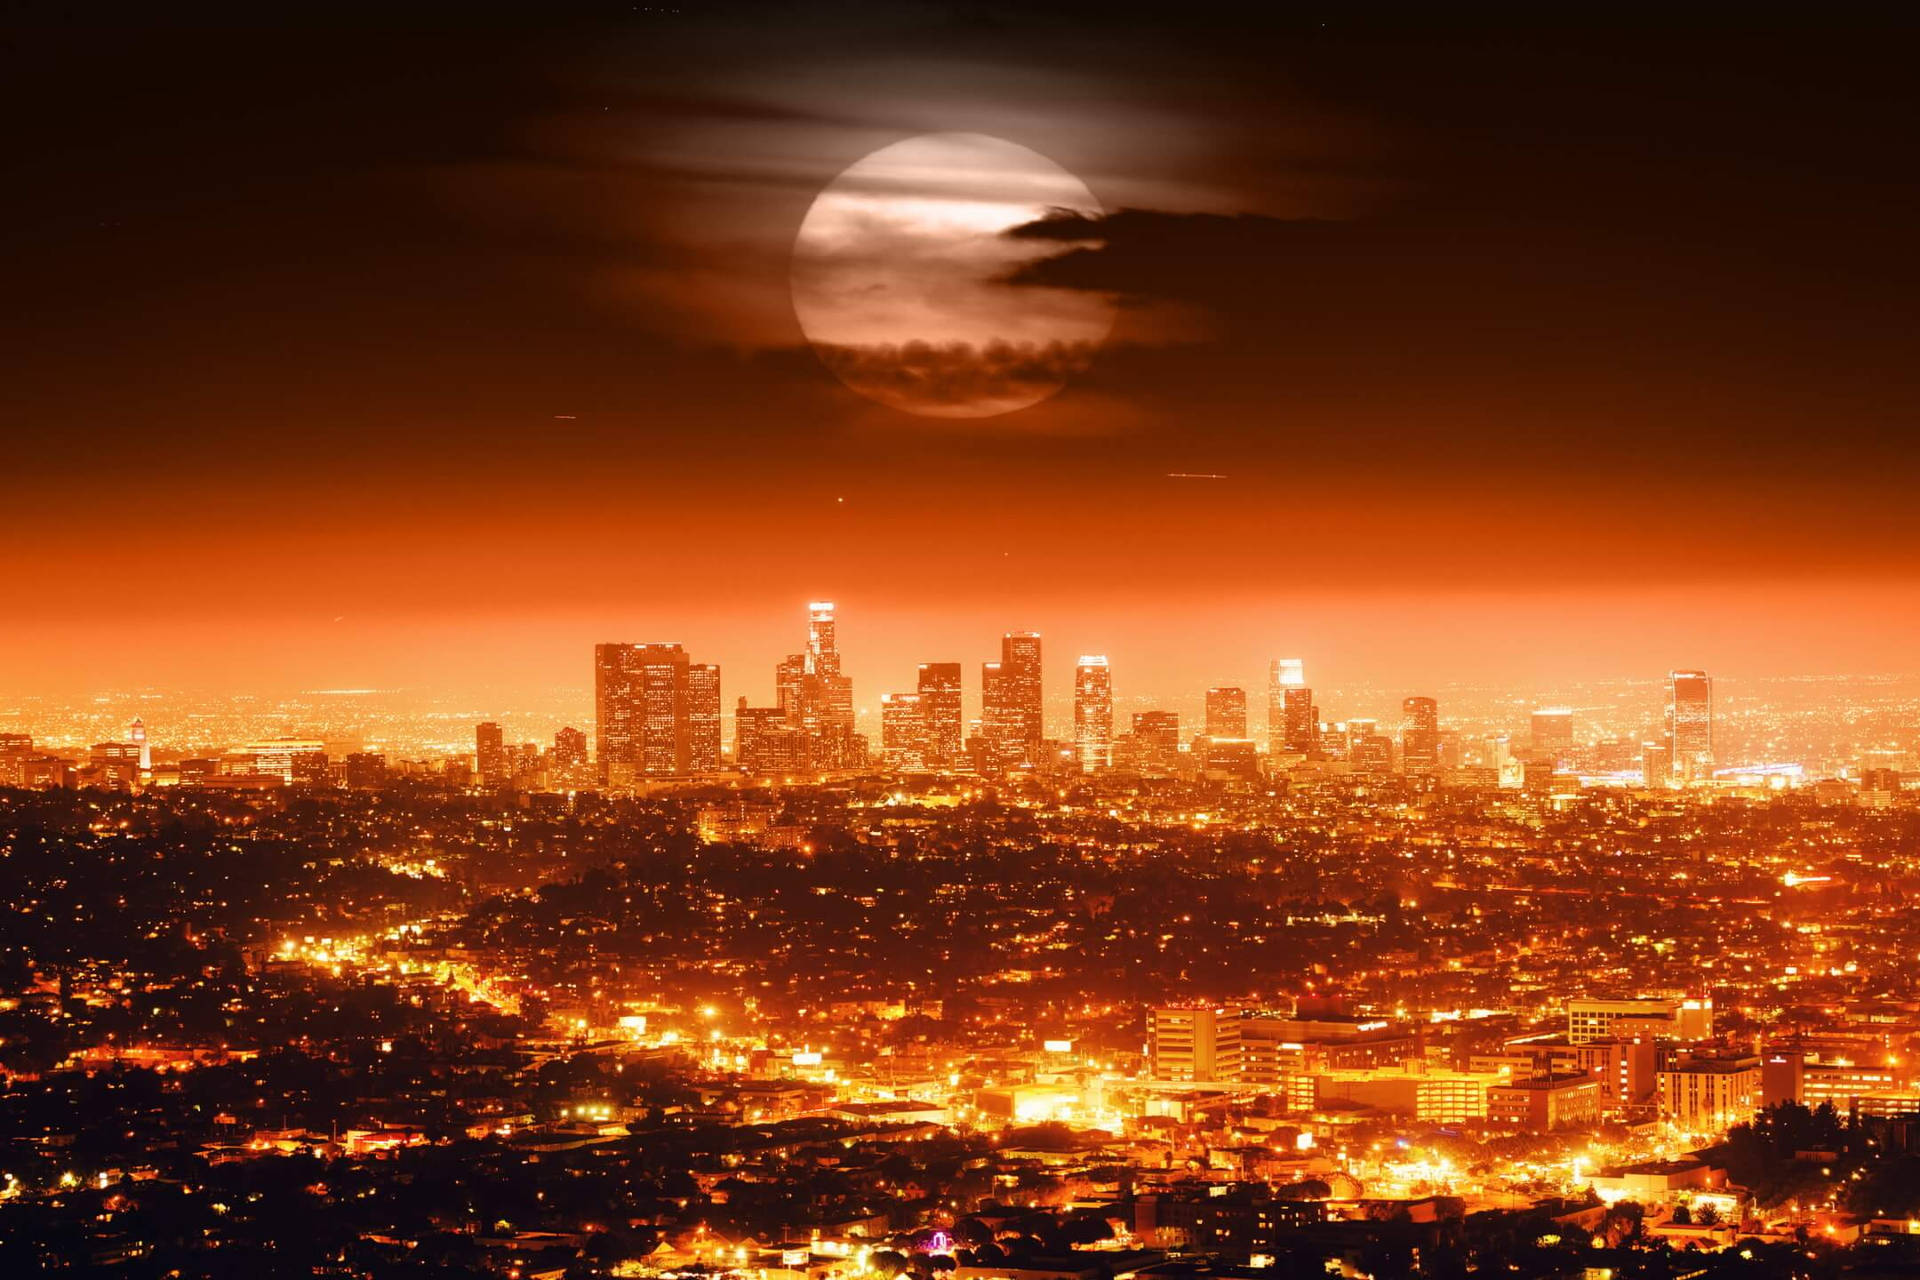 A View of the City at Night Wallpaper